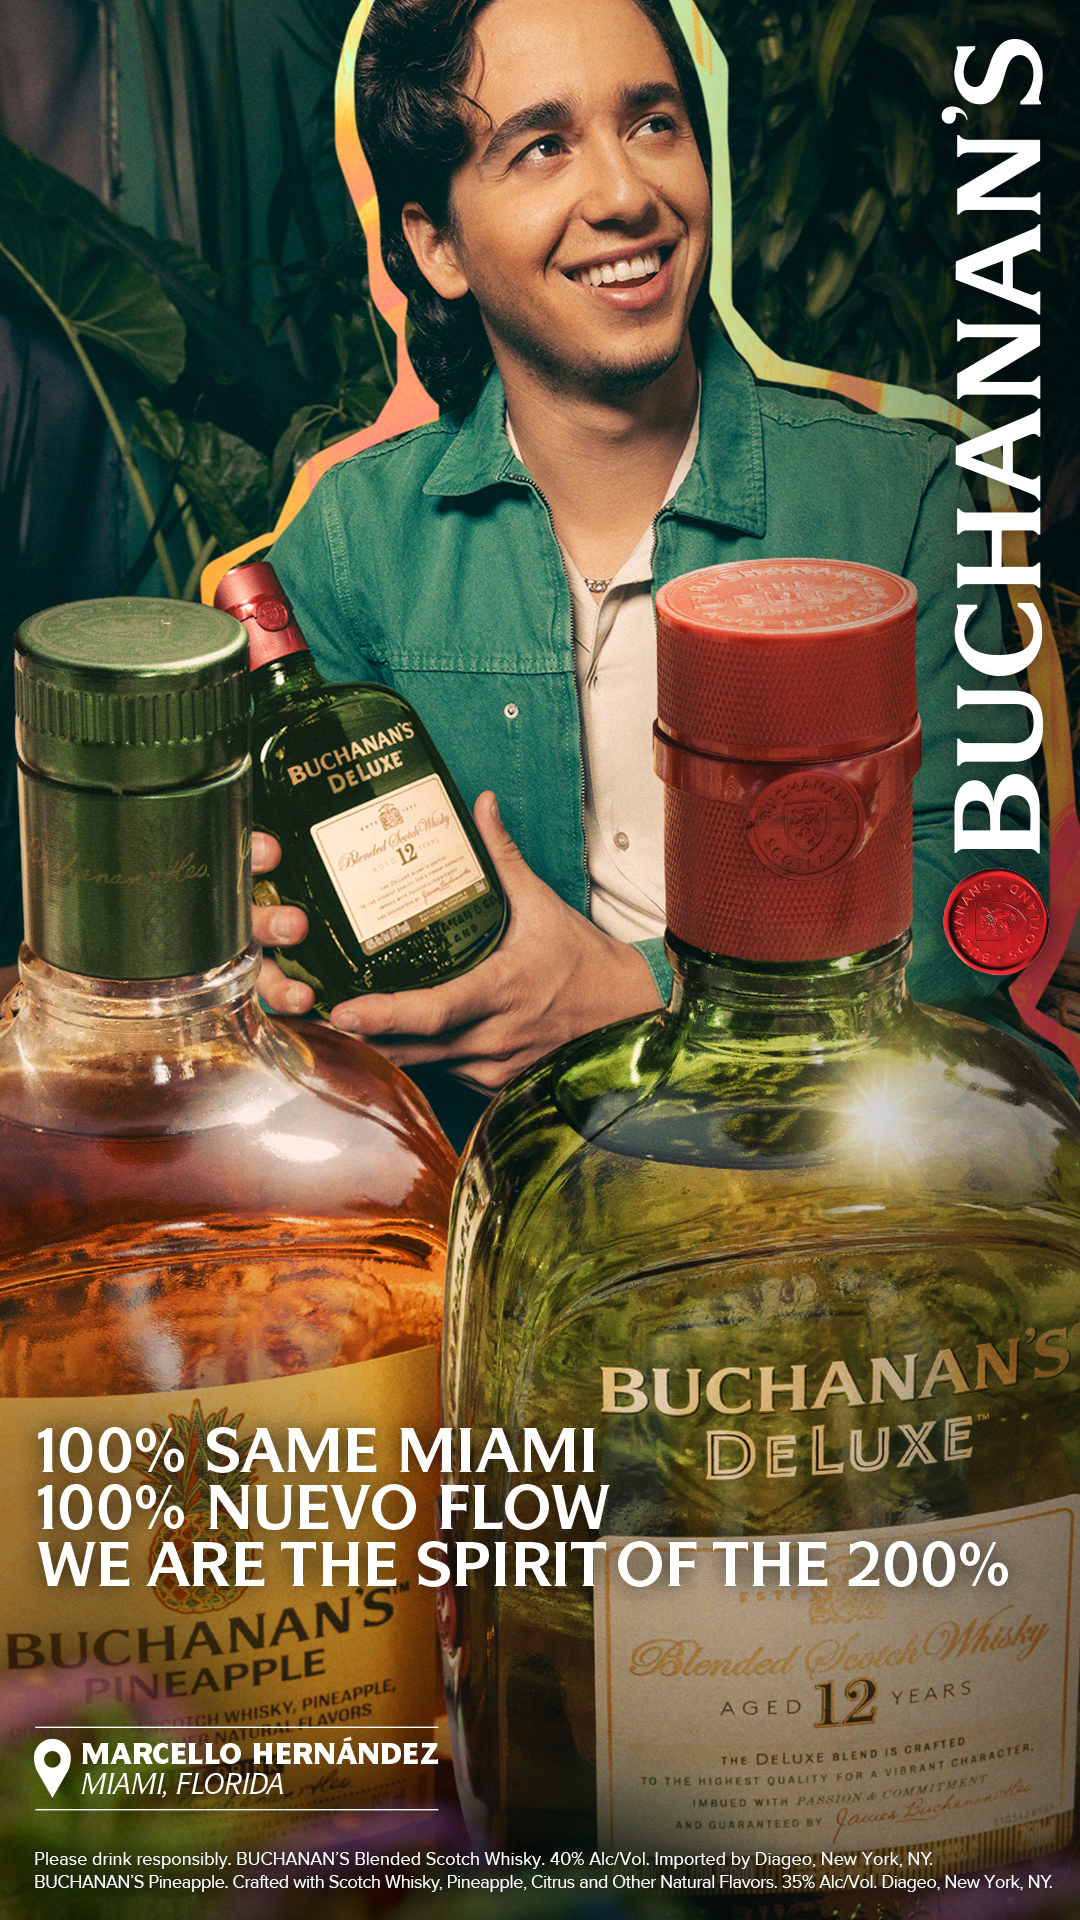 BUCHANAN’S SCOTCH WHISKY LAUNCHES NEWEST “WE ARE THE SPIRIT OF THE 200%” MARKETING CAMPAIGN, FEATURING SATURDAY NIGHT LIVE BREAKOUT COMEDIAN MARCELLO HERNÁNDEZ AND A CAST OF HISPANIC AMERICAN CREATORS CELEBRATING THEIR HERITAGE WHILE REIMAGINING TRADITIONS IN THEIR OWN UNIQUE STYLE